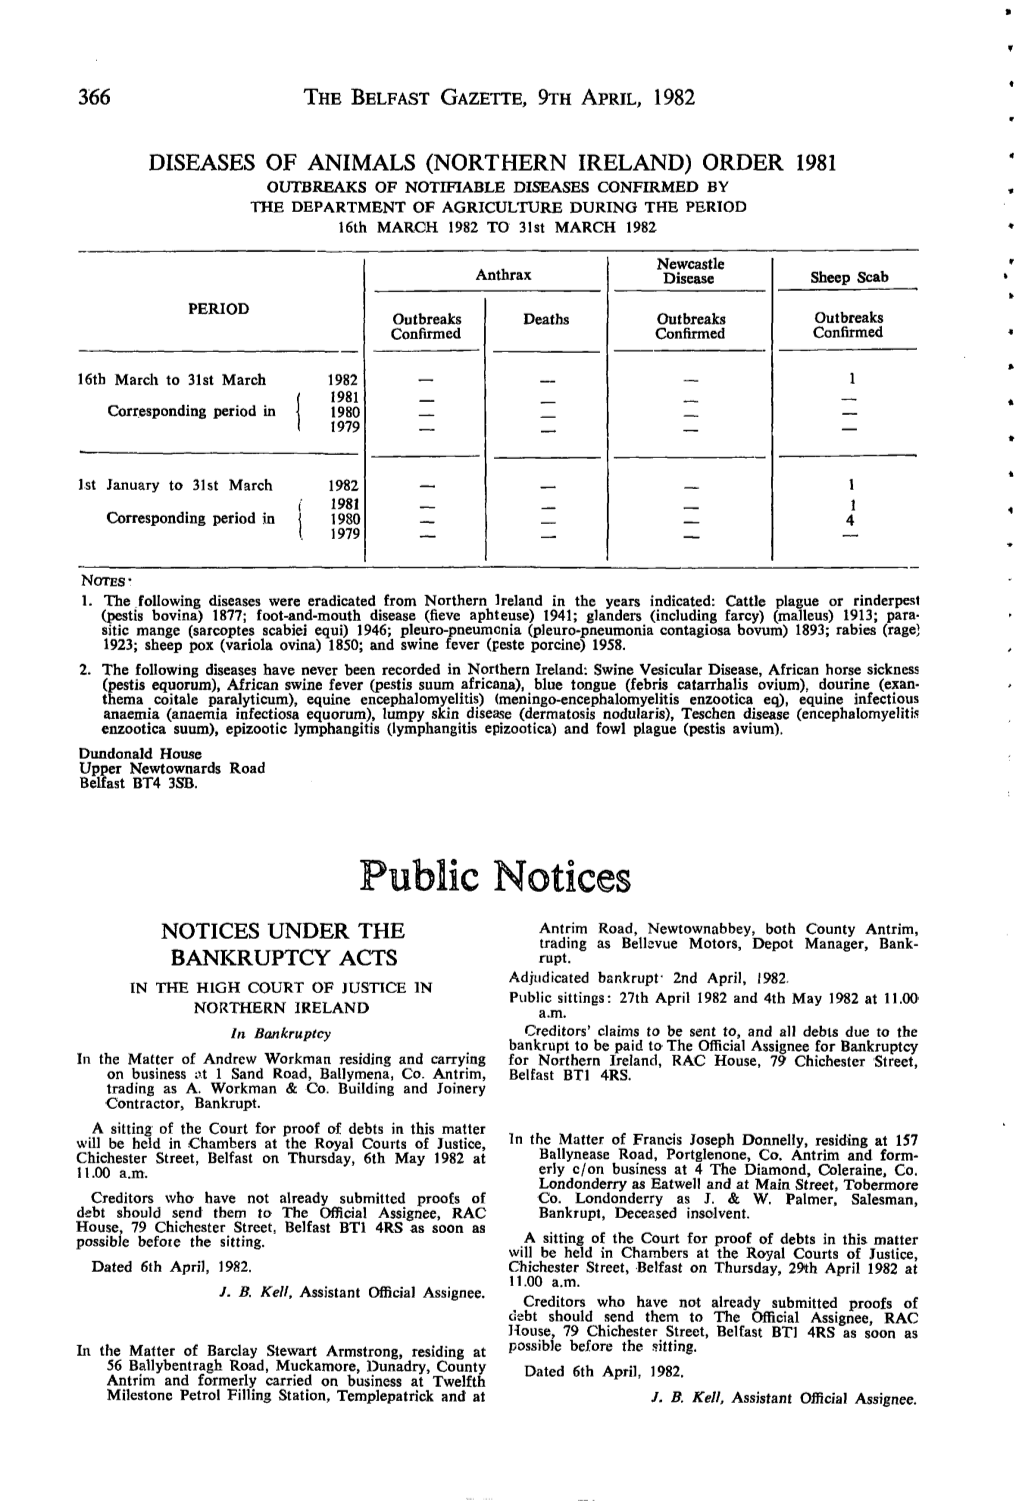 NORTHERN IRELAND) ORDER 1981 OUTBREAKS of NOTIFIABLE DISEASES CONFIRMED by the DEPARTMENT of AGRICULTURE DURING the PERIOD 16Th MARCH 1982 to 31St MARCH 1982